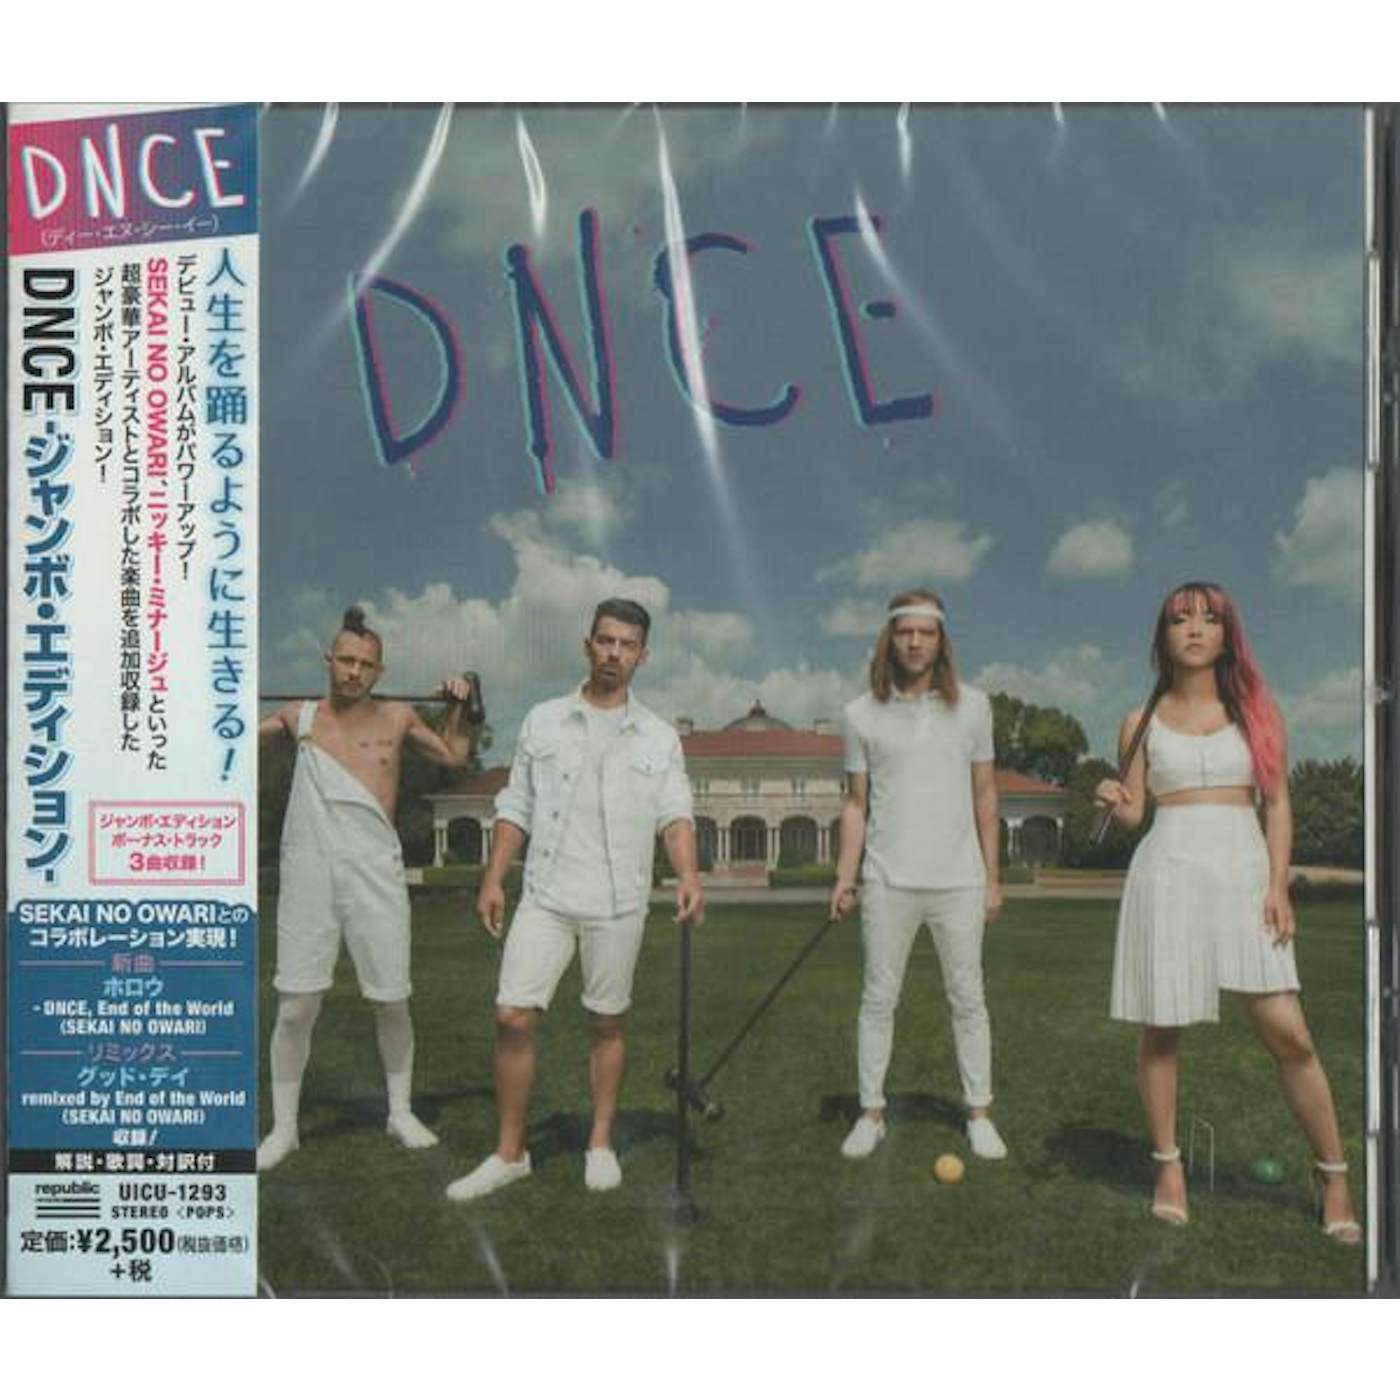 DNCE & MORE CD